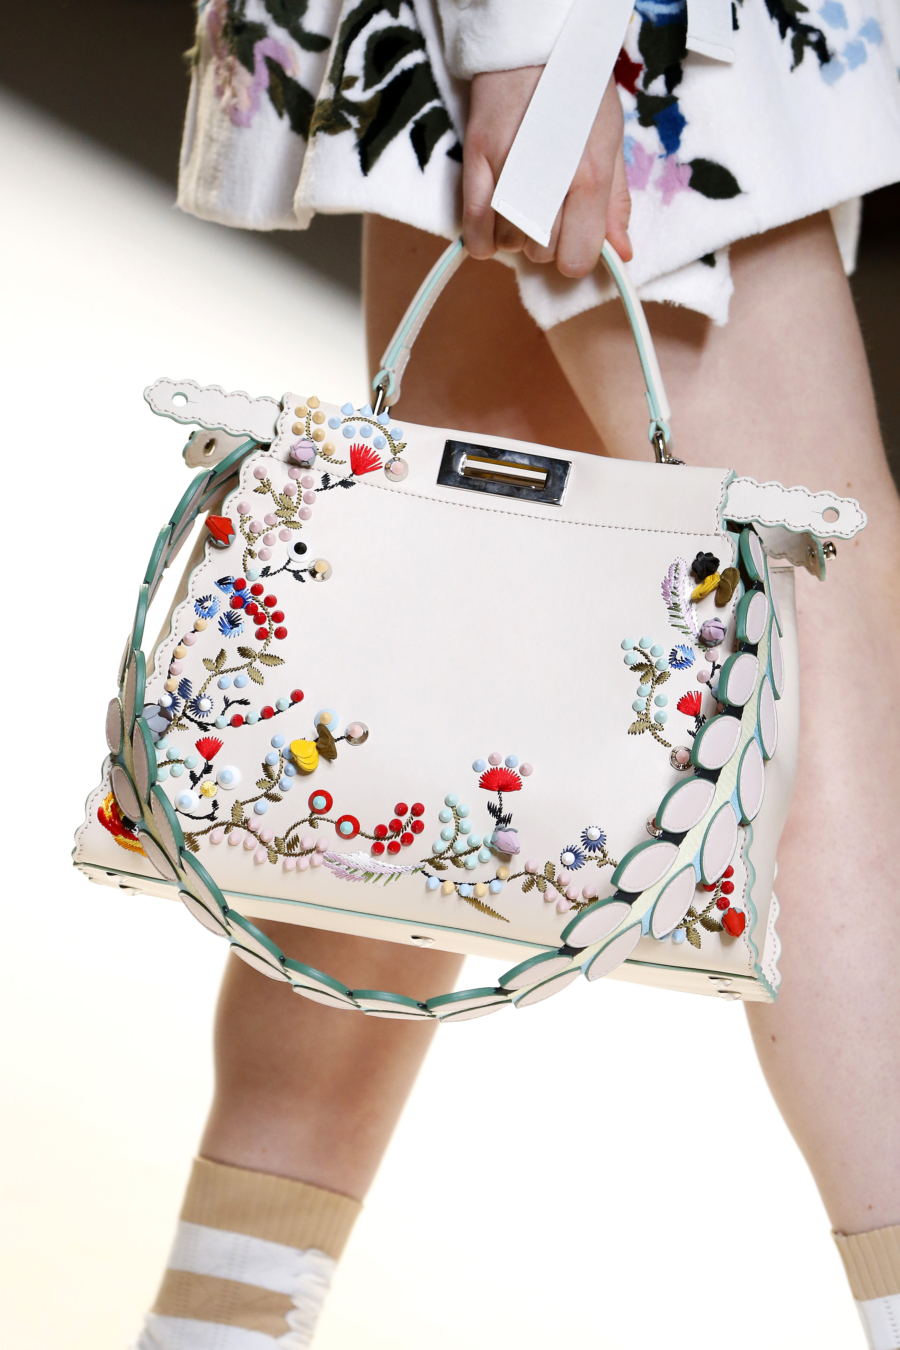 Floral Embroidered Bag - 7 Pieces That Look Adorable With Flower Embroidery // Notjessfashion.com